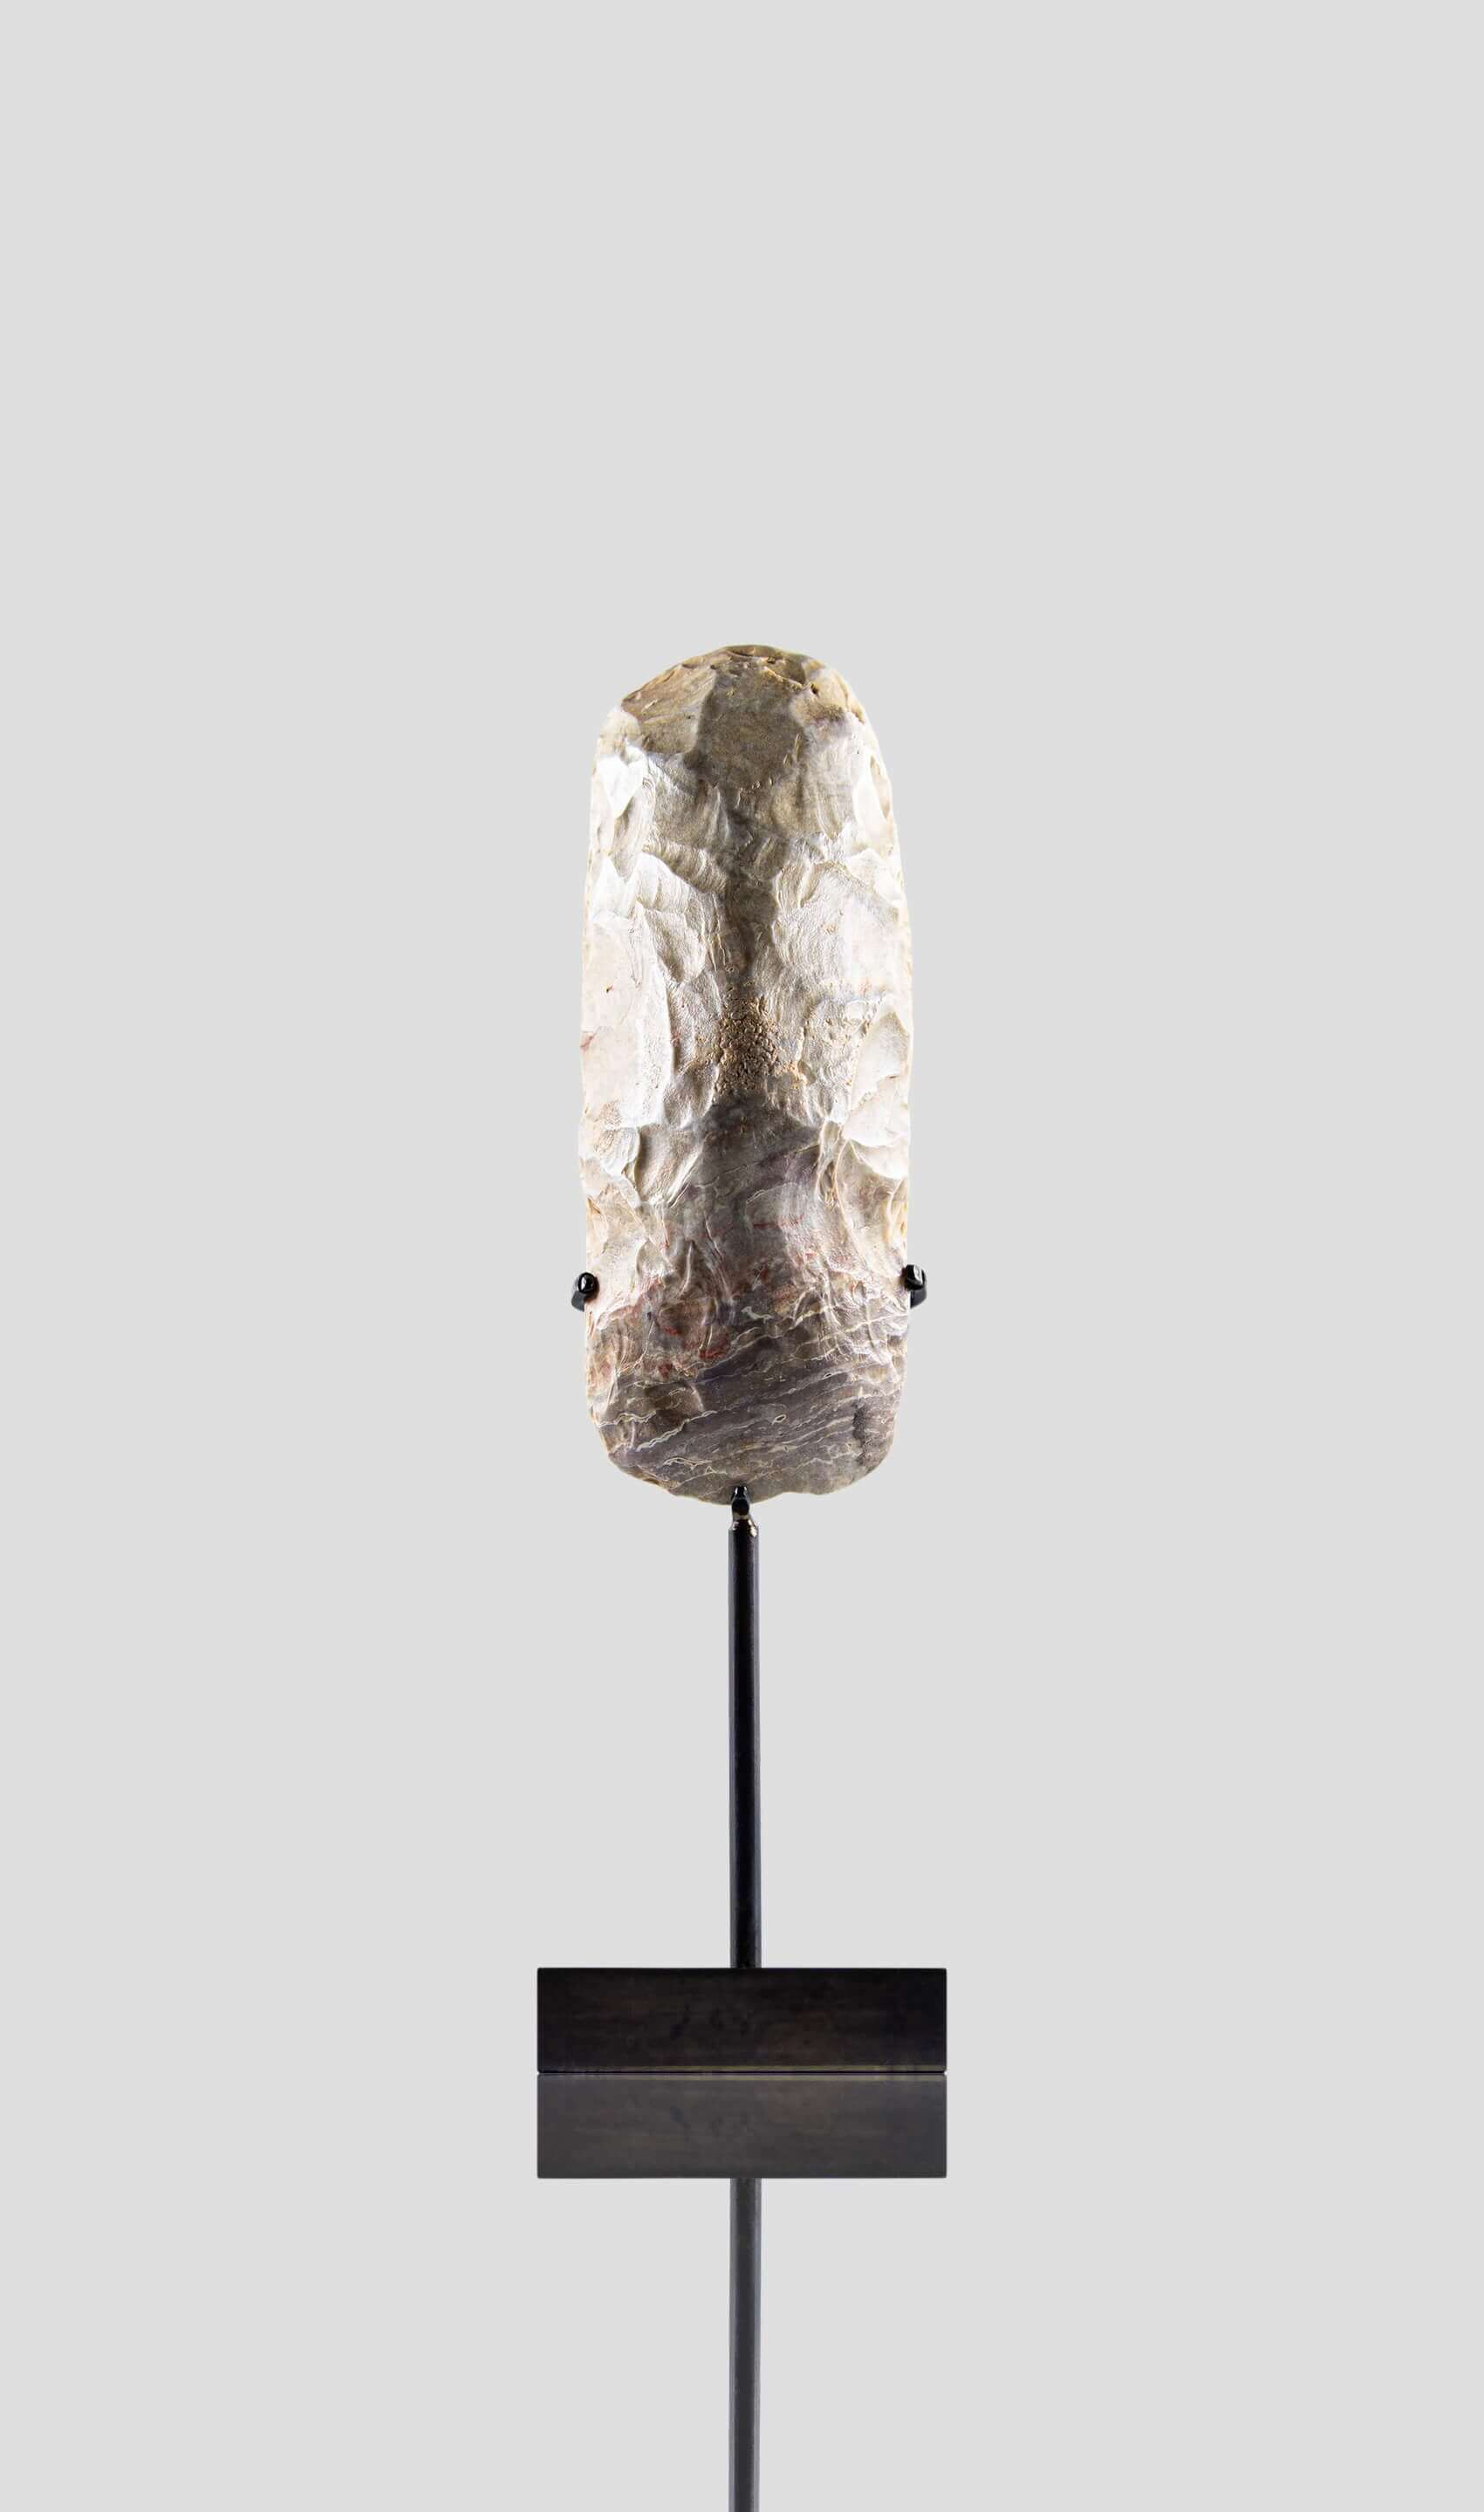 artefact hand axe for sale on bronze stand 2